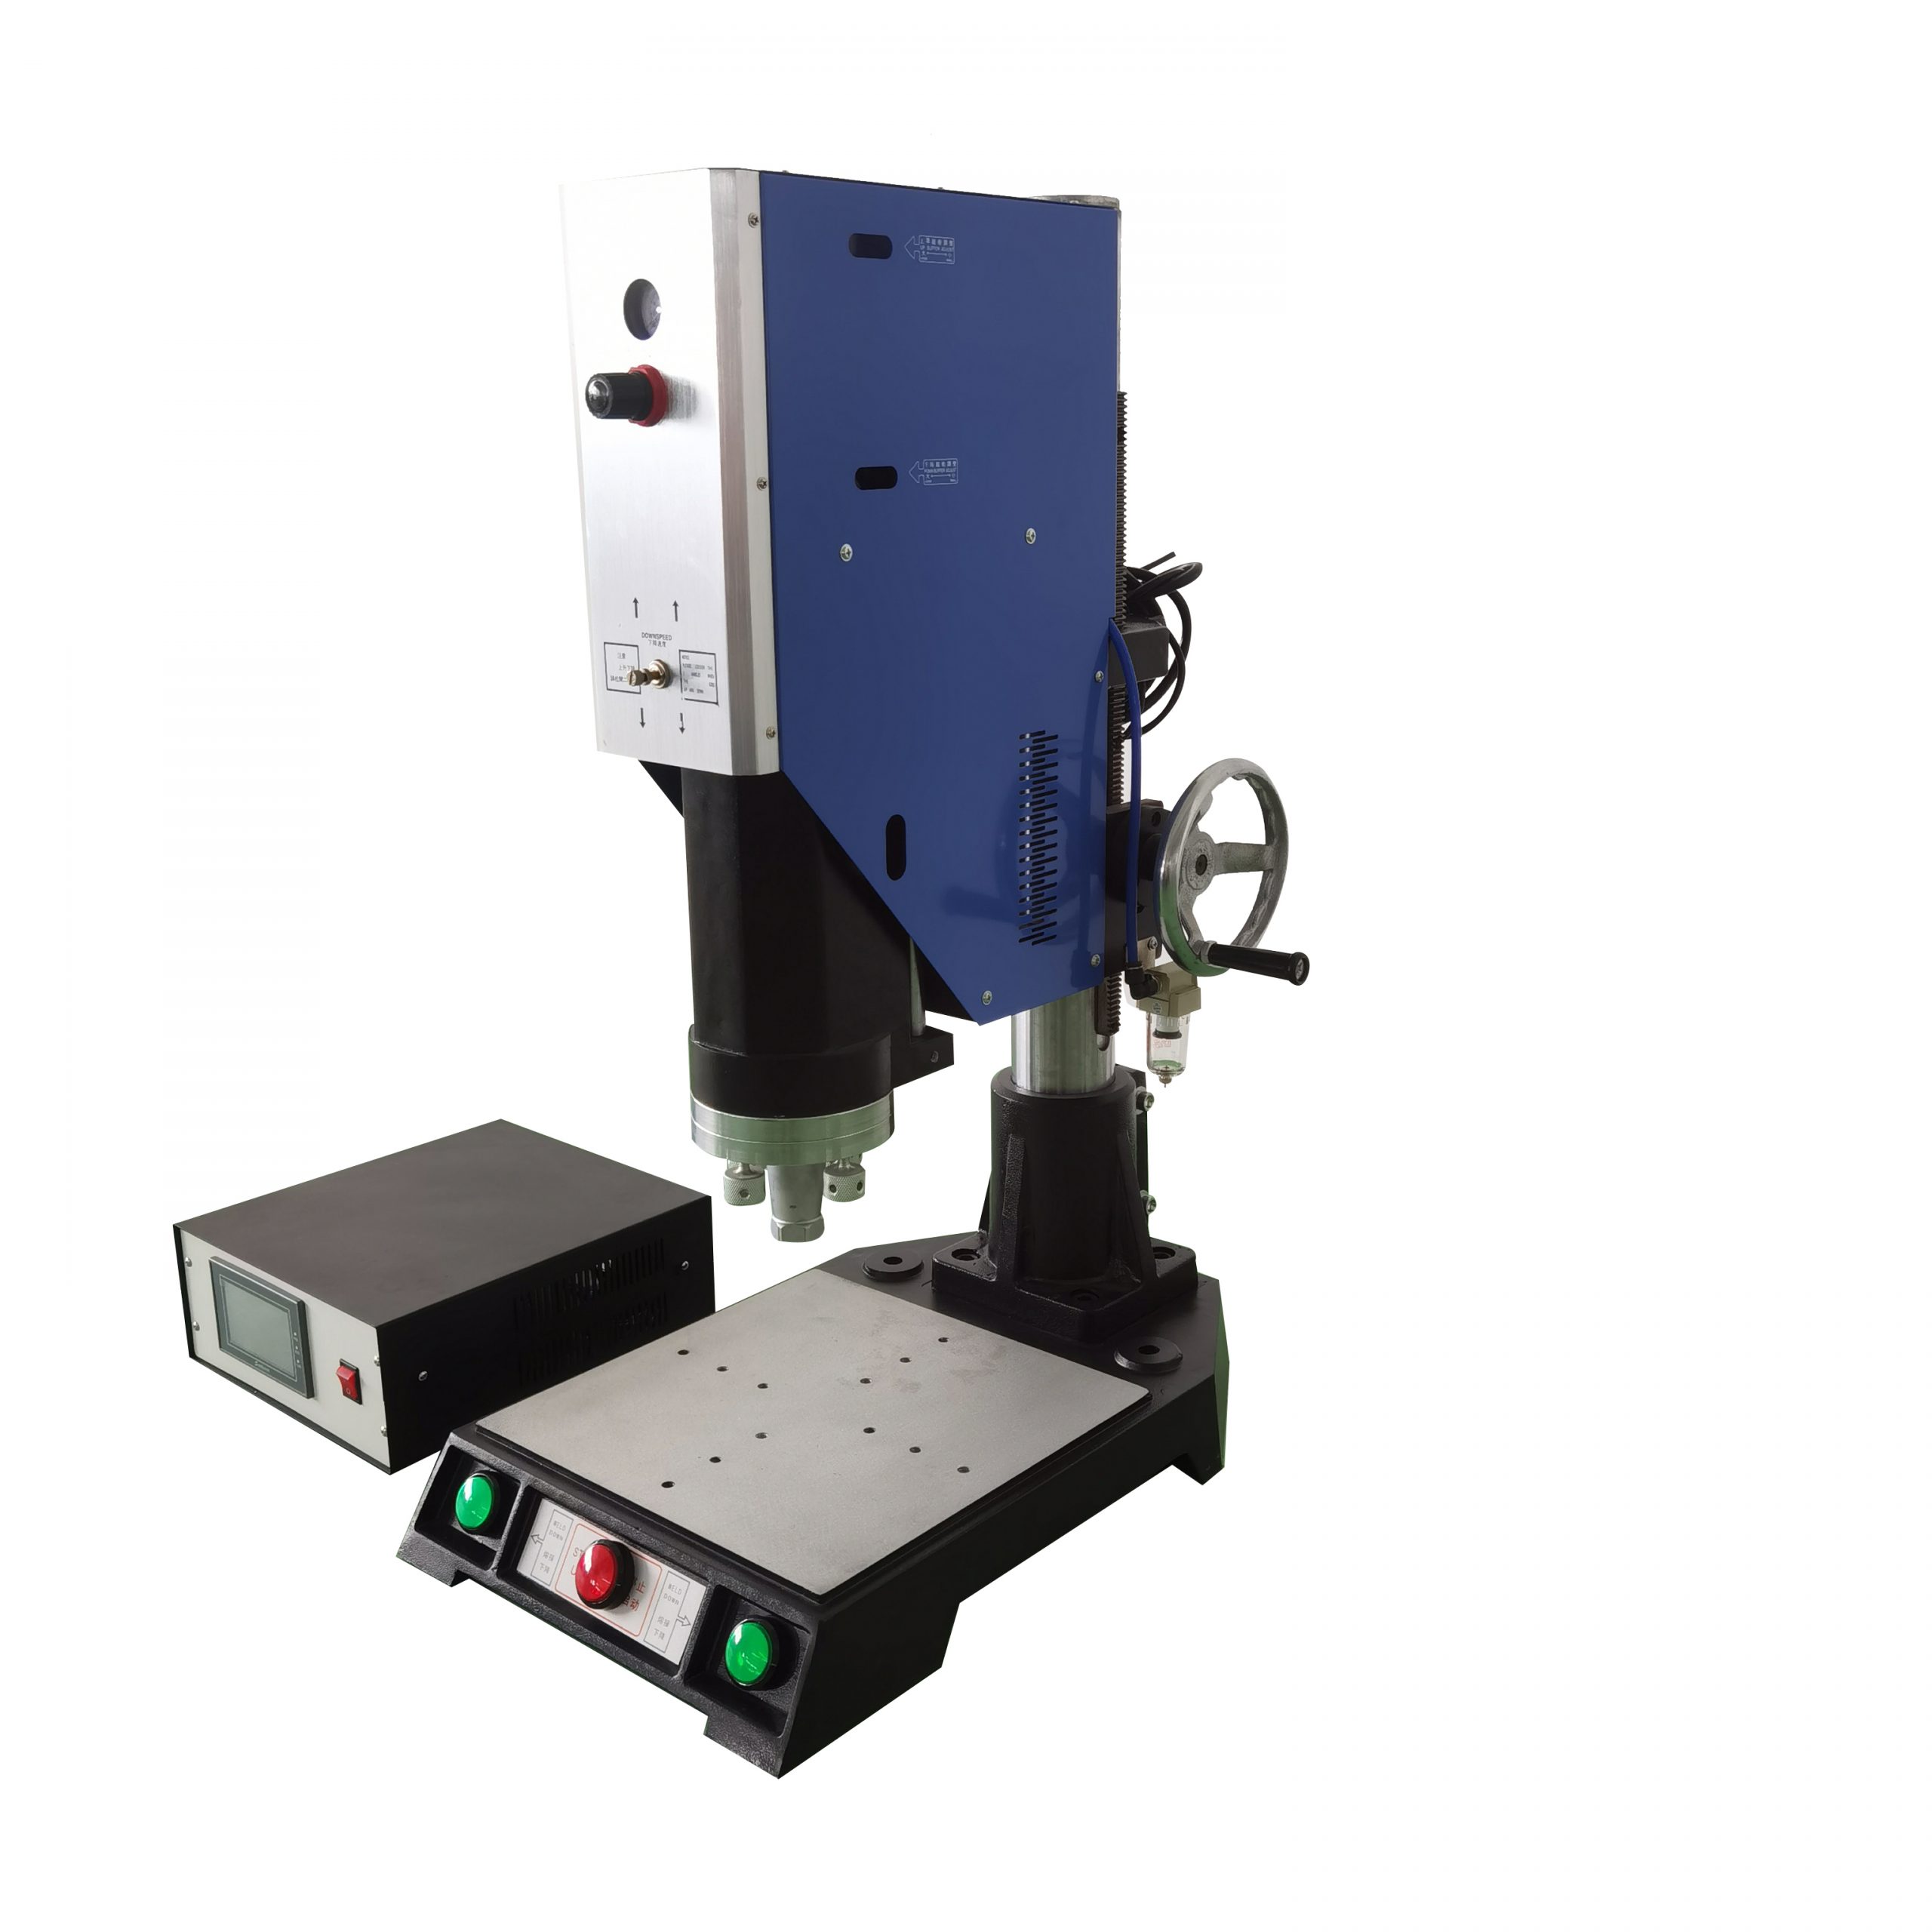 2023070417014798 scaled - ABS PP Ultrasonic High Frequency Plastic Welder Plastic Welding Machine For PSA Grading Card Plastic Slabs Case Sealing